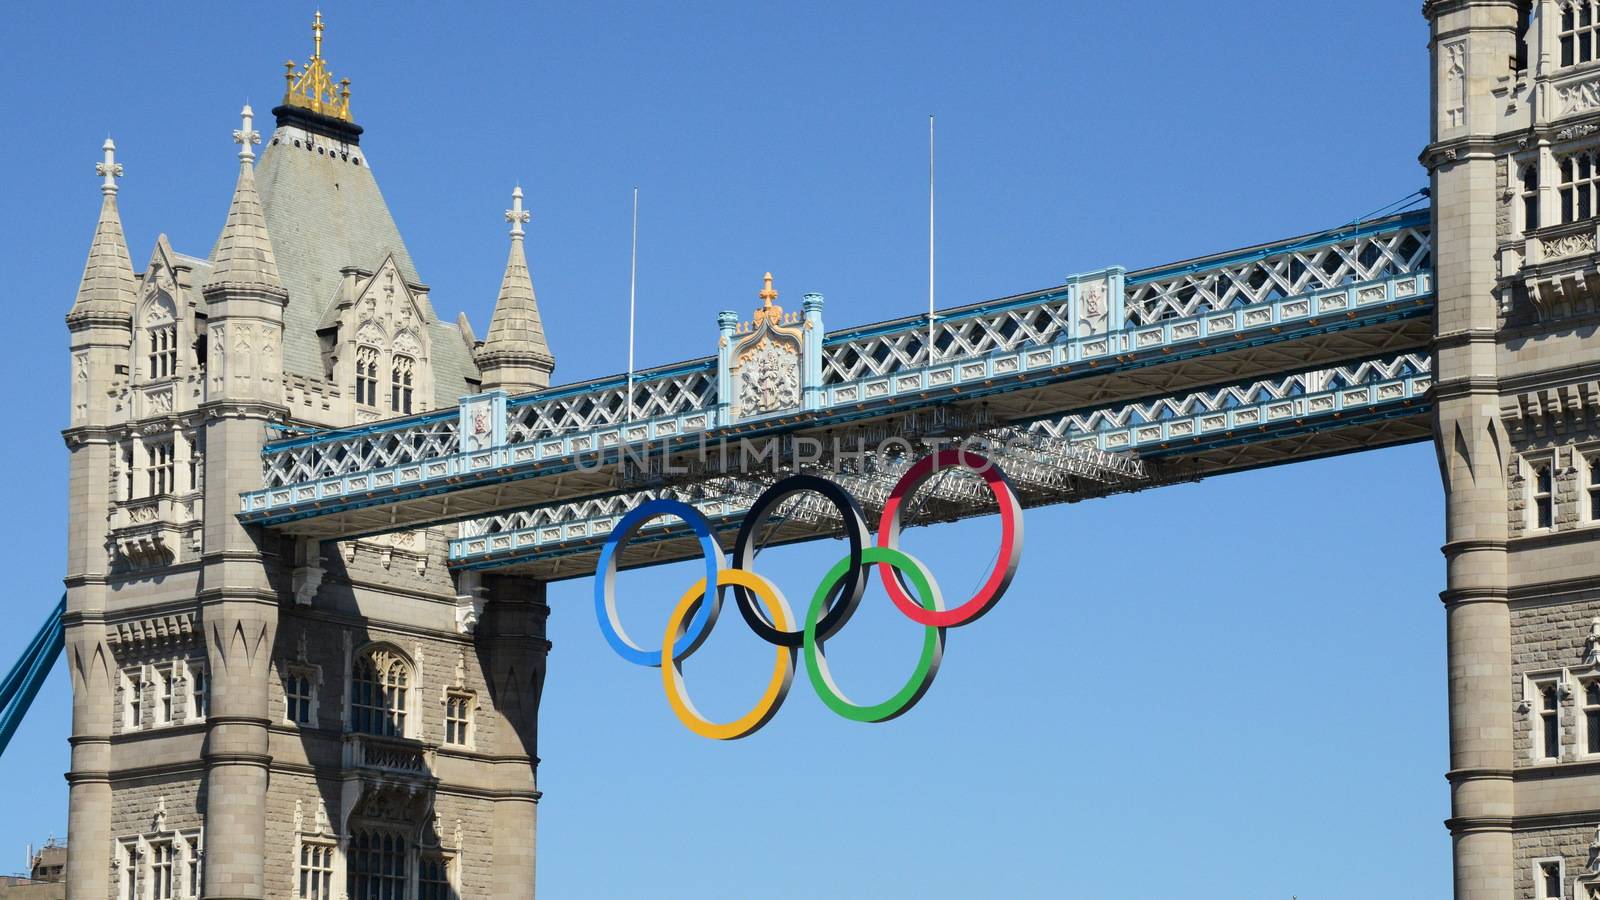 Olympic rings on Tower bridge by gorilla